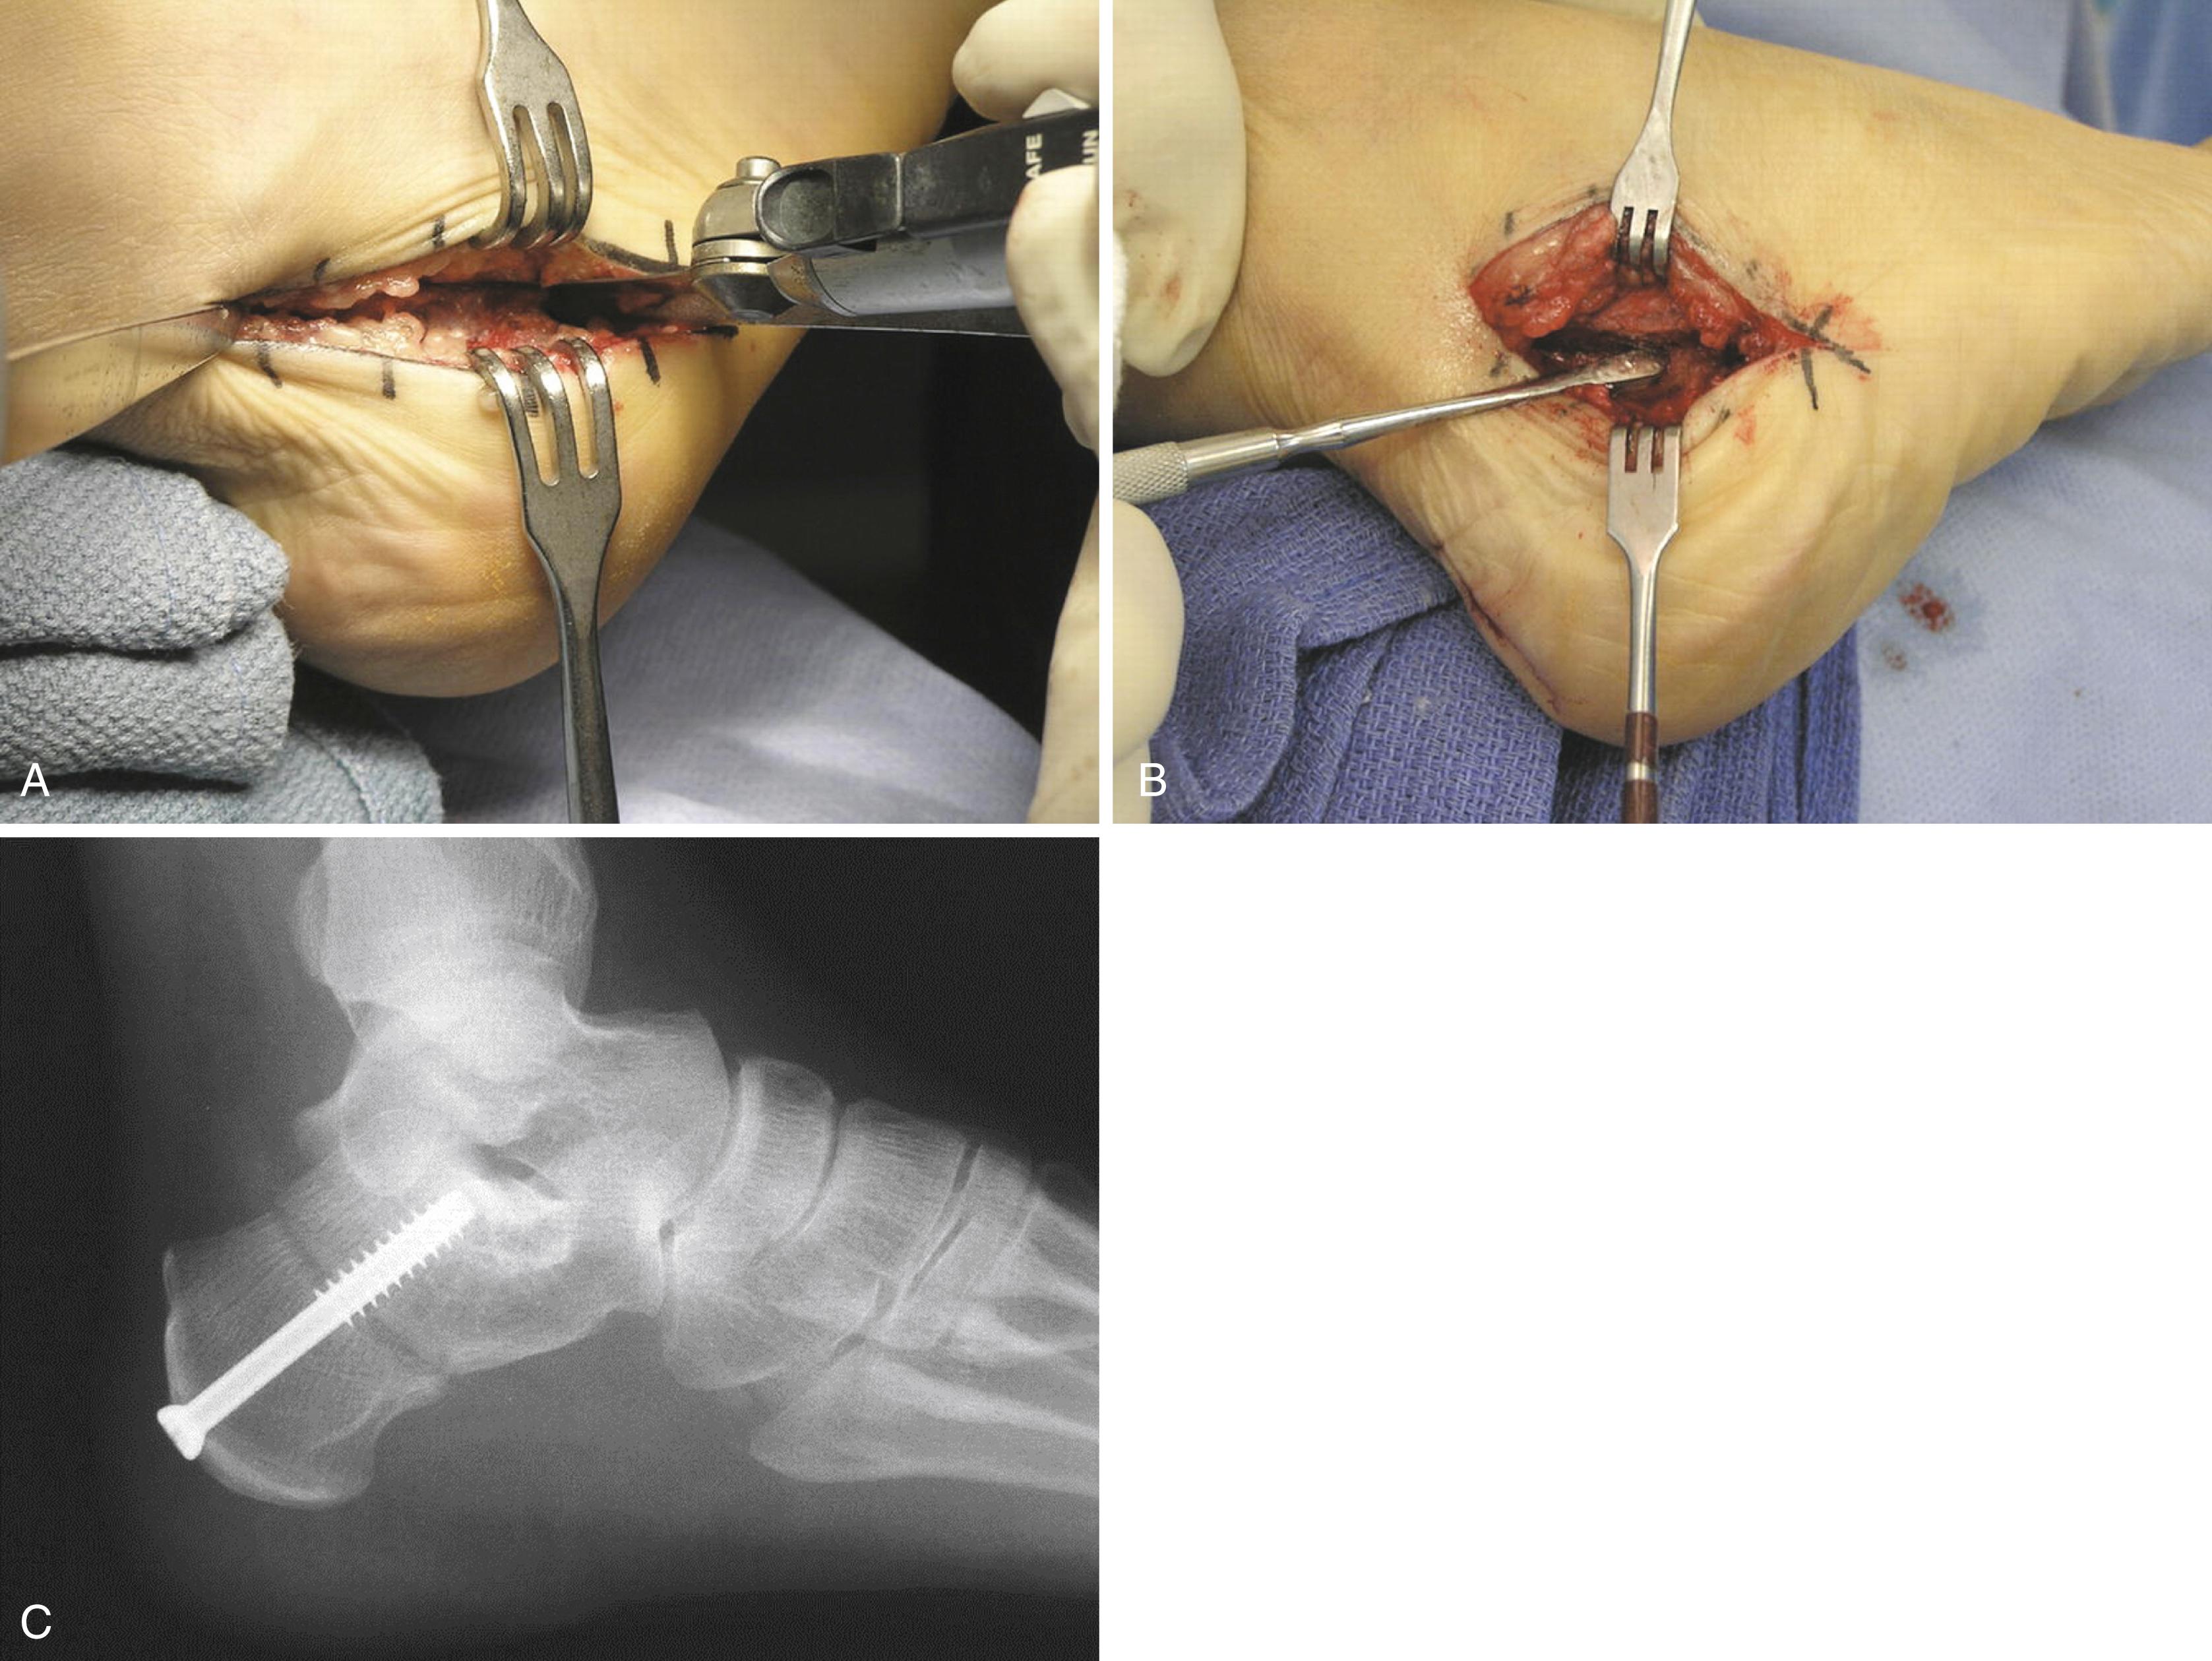 FIGURE 83.29, Medial displacement osteotomy. A, Transverse osteotomy made with oscillating saw. B, Posterior tuberosity displaced medially. C, Fixation with cannulated screw.